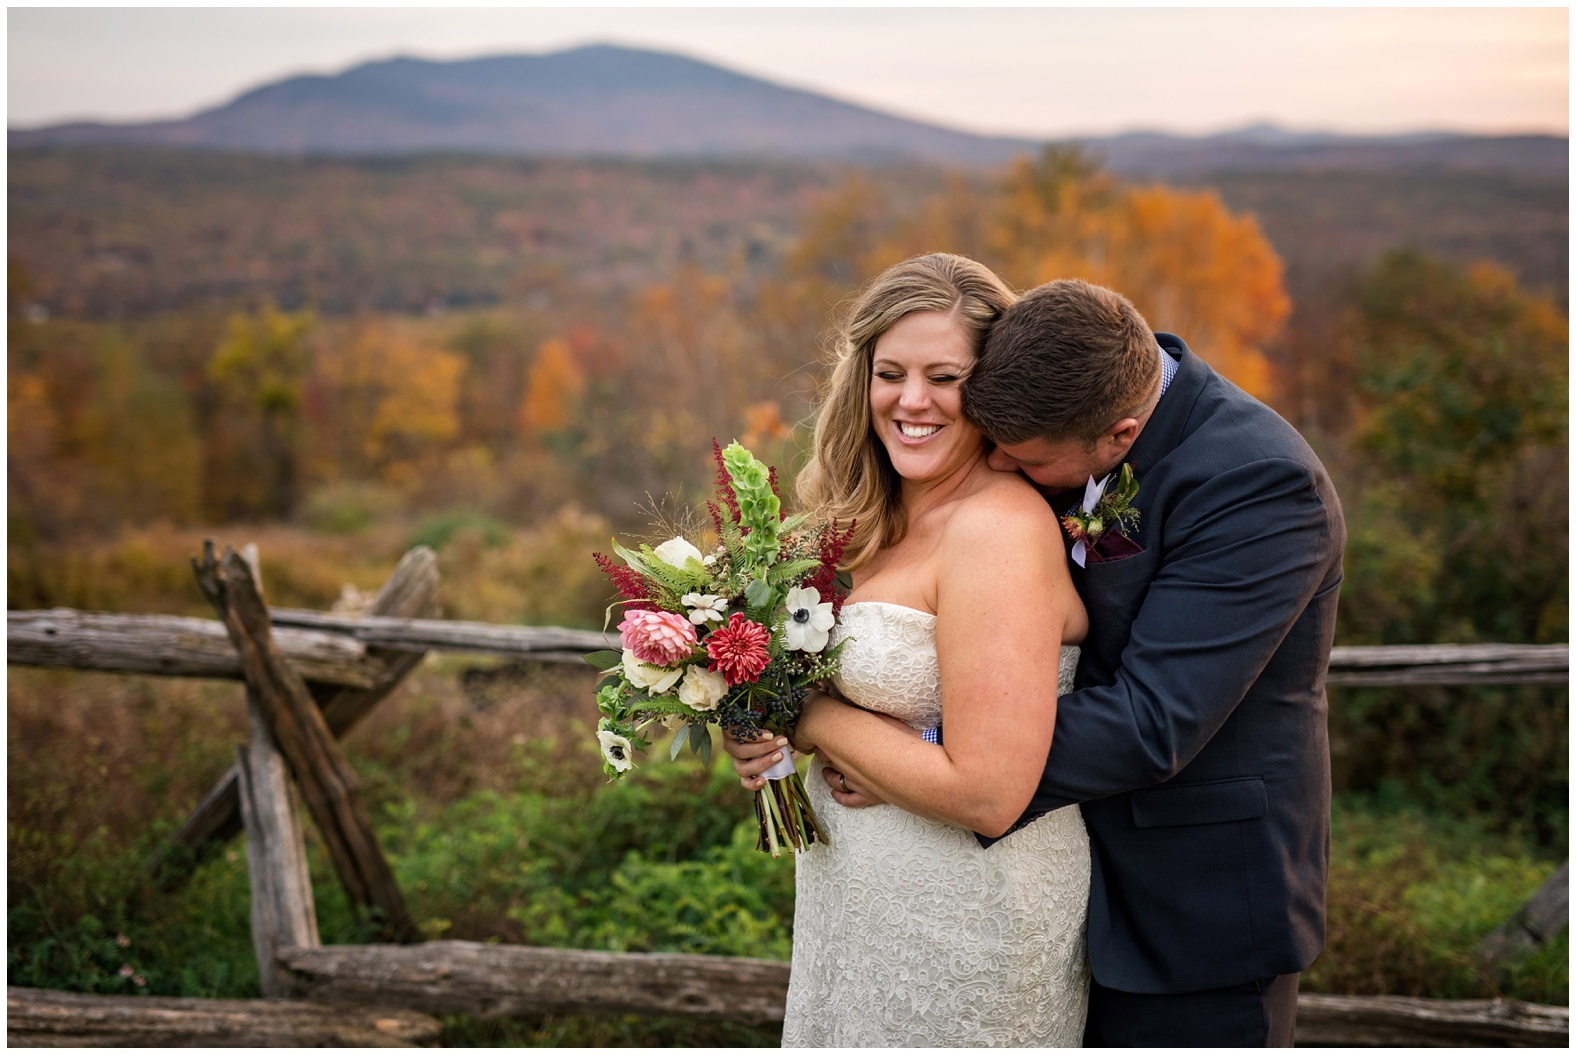 scenic,eclectic,fall,autumn,mountain,mountainview,wedding,cobb hill estate,harrisville,New hampshire,NH,new england,country,tented wedding,